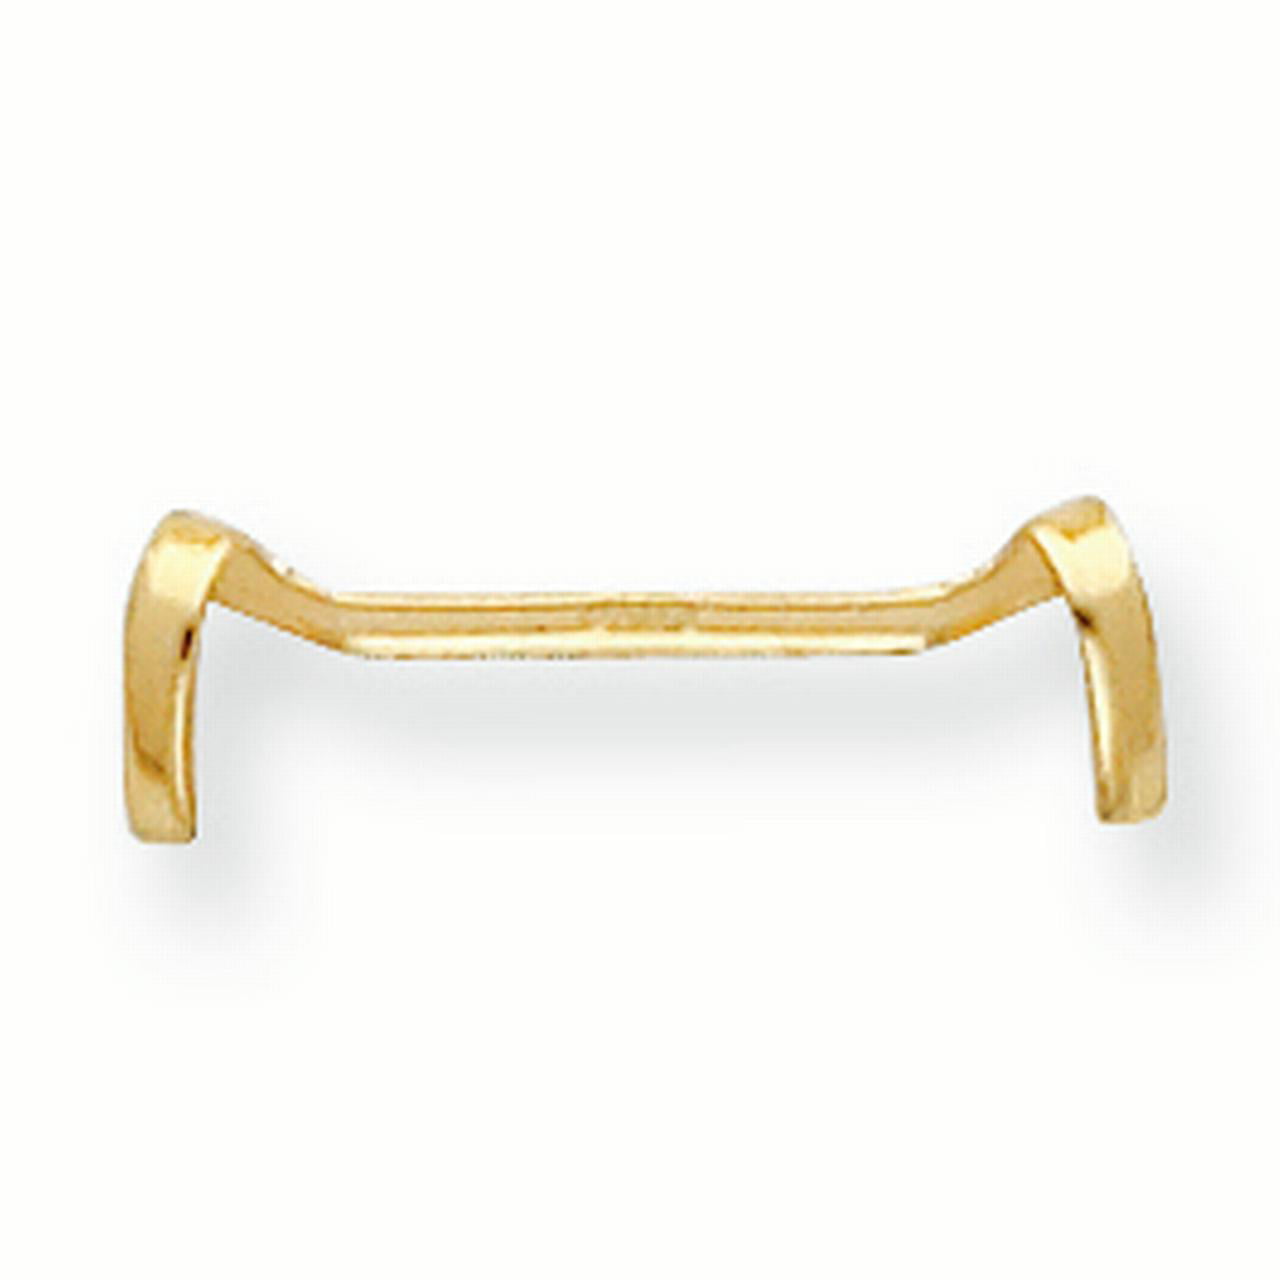 IceCarats 14k Yellow Gold Ladies Band Ring Size Adjuster For Loose